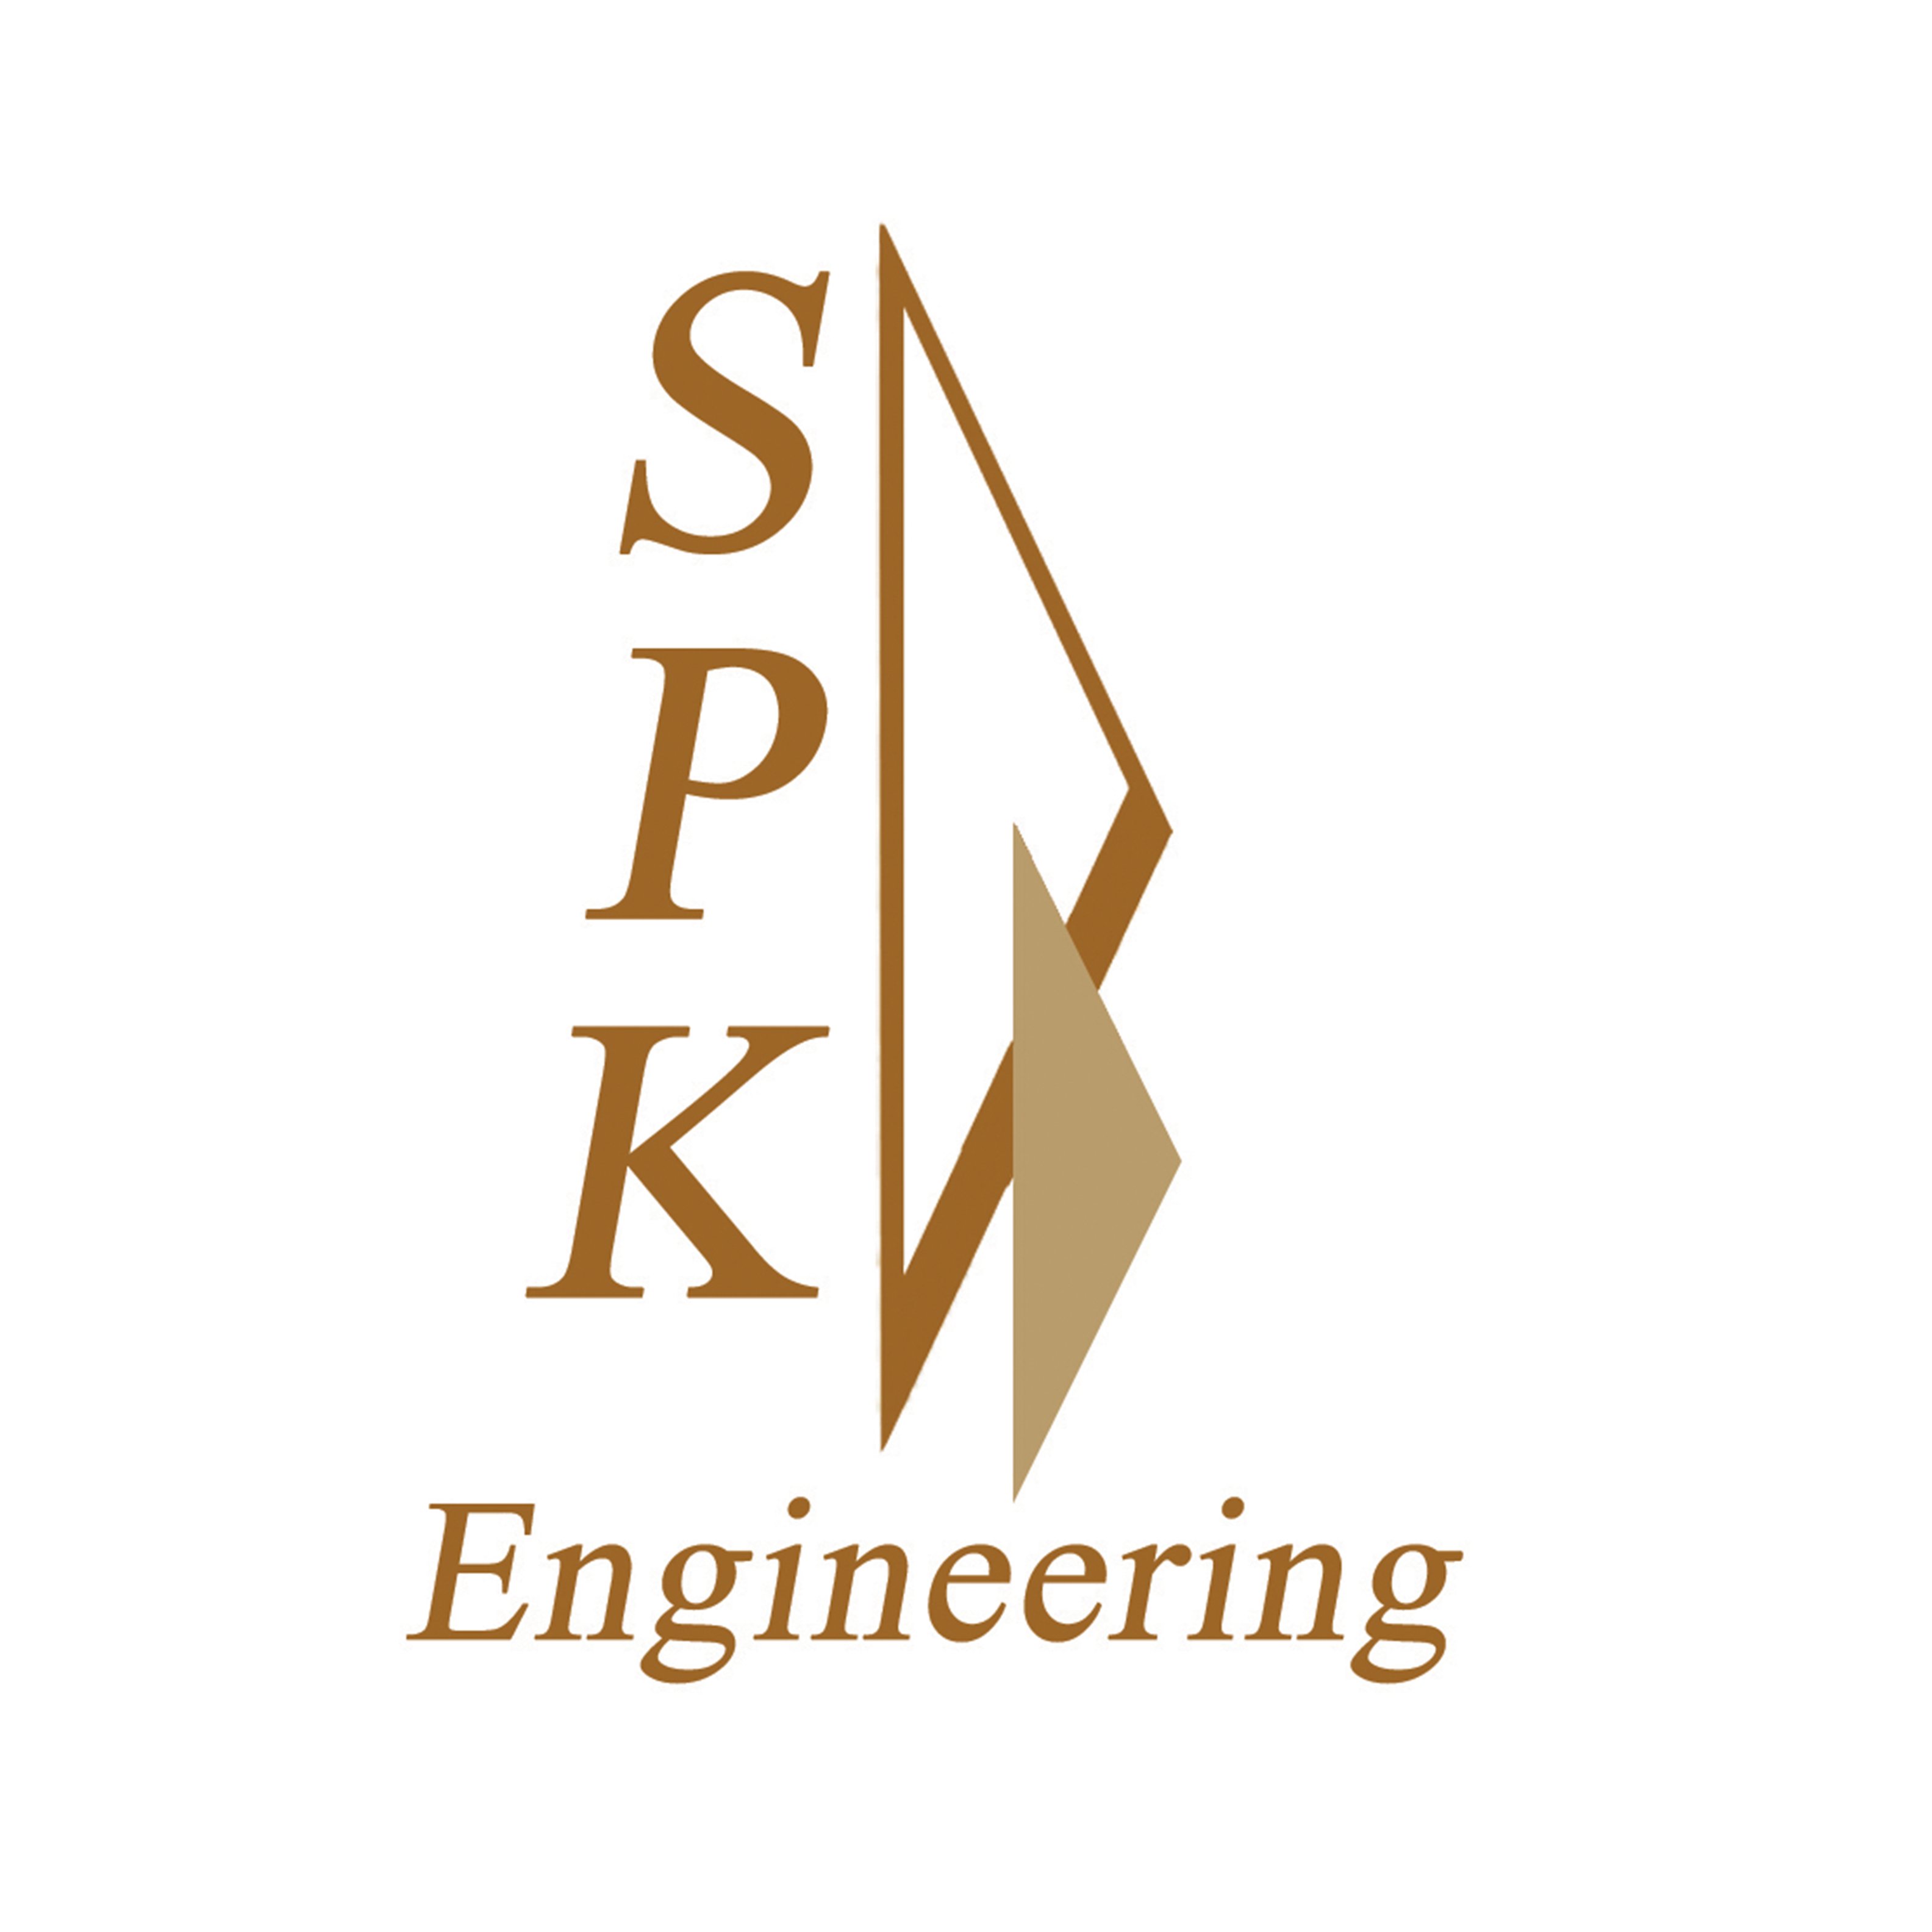 Founded in 1981, SPK Engineering has been providing civil engineering designs and surveying services for over 30 years!